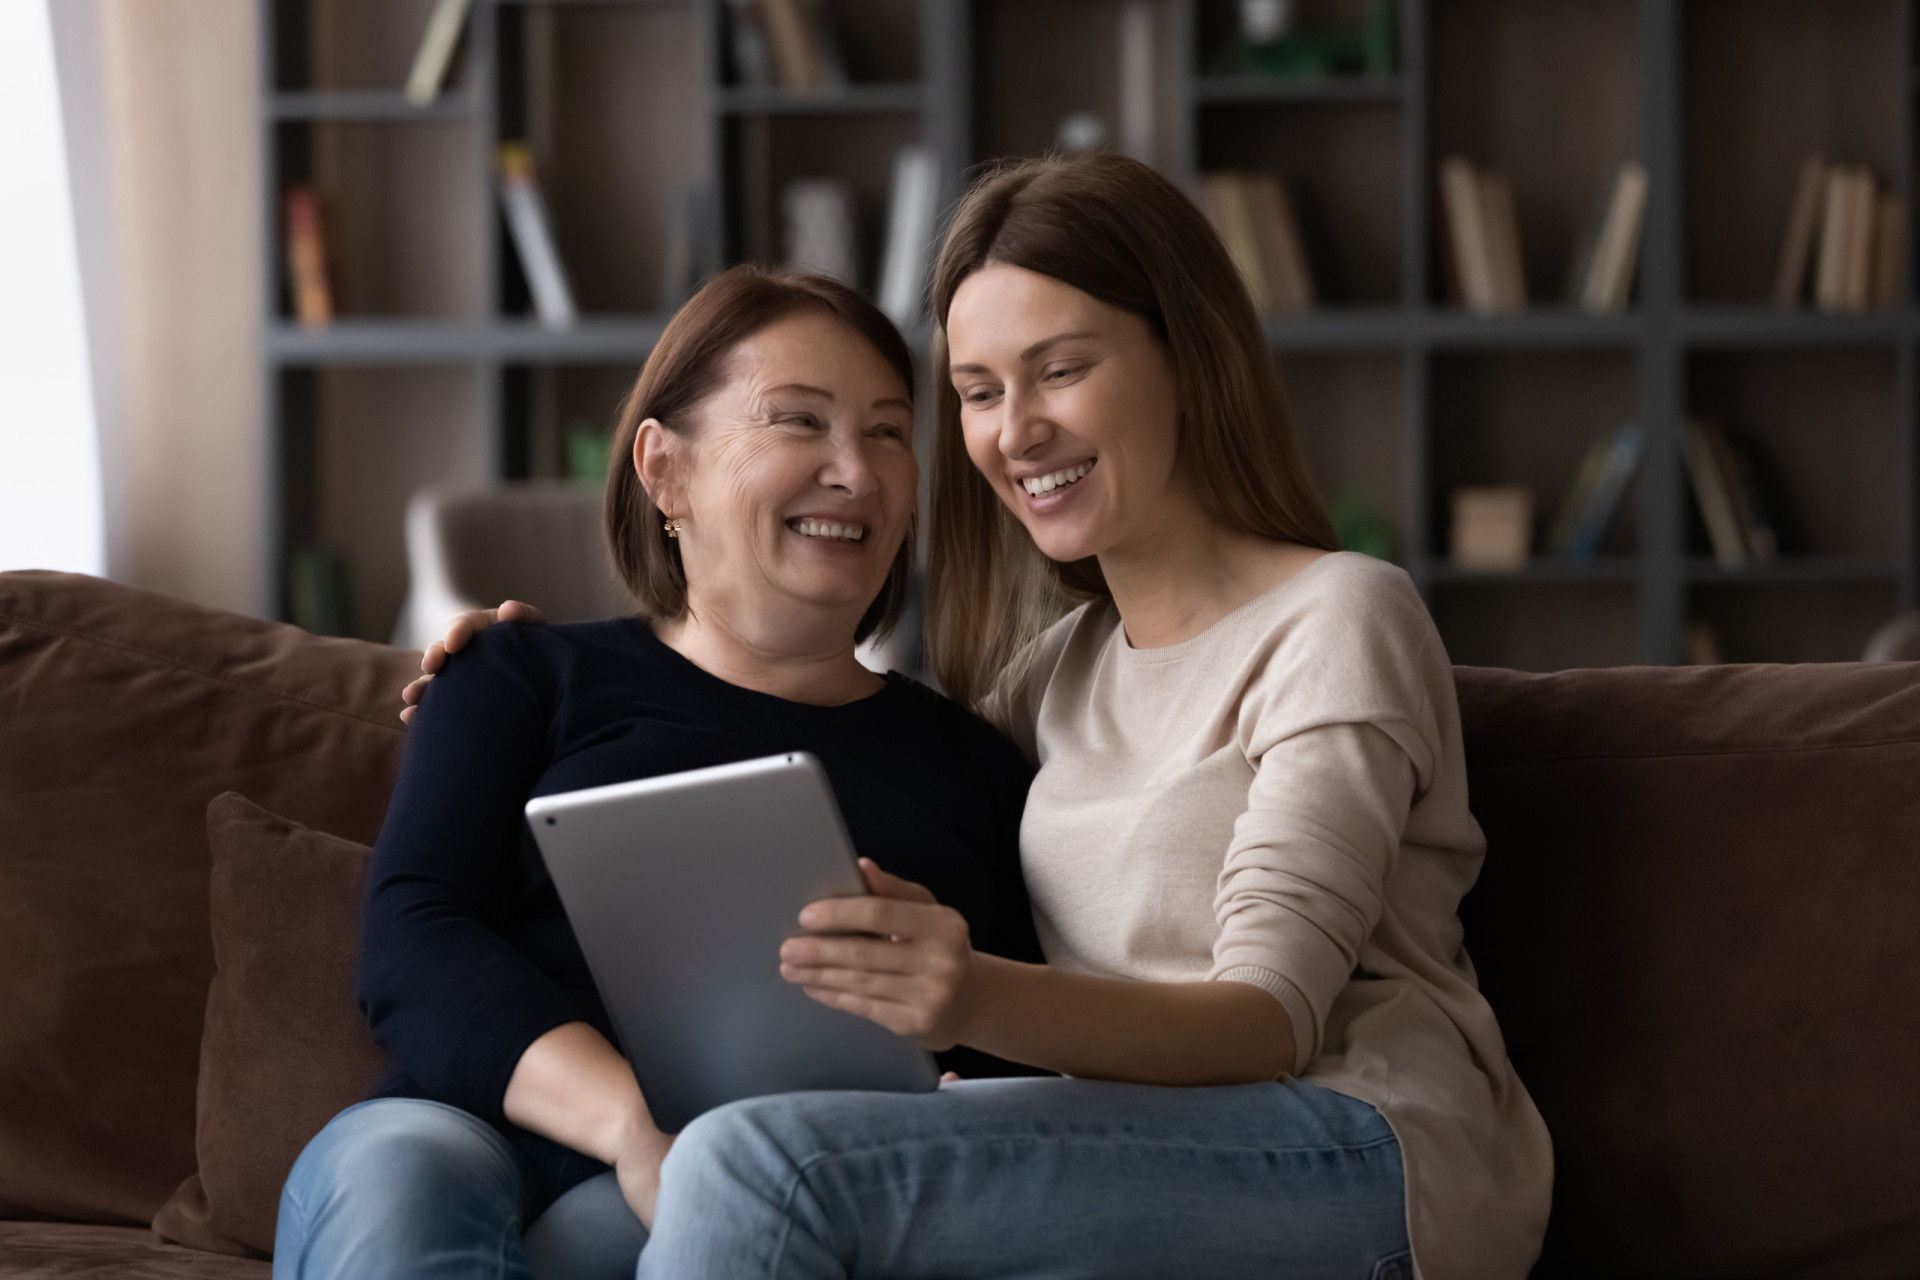 <p>What’s better than reading a good book? Answer: reading a good book with your mom! Schedule a once-a-month ‘club’ hangout (online or in person) and recap your favorite parts of the book together.</p><p><a href="https://www.msn.com/en-us/community/channel/vid-7xx8mnucu55yw63we9va2gwr7uihbxwc68fxqp25x6tg4ftibpra?cvid=94631541bc0f4f89bfd59158d696ad7e">Follow us and access great exclusive content every day</a></p>